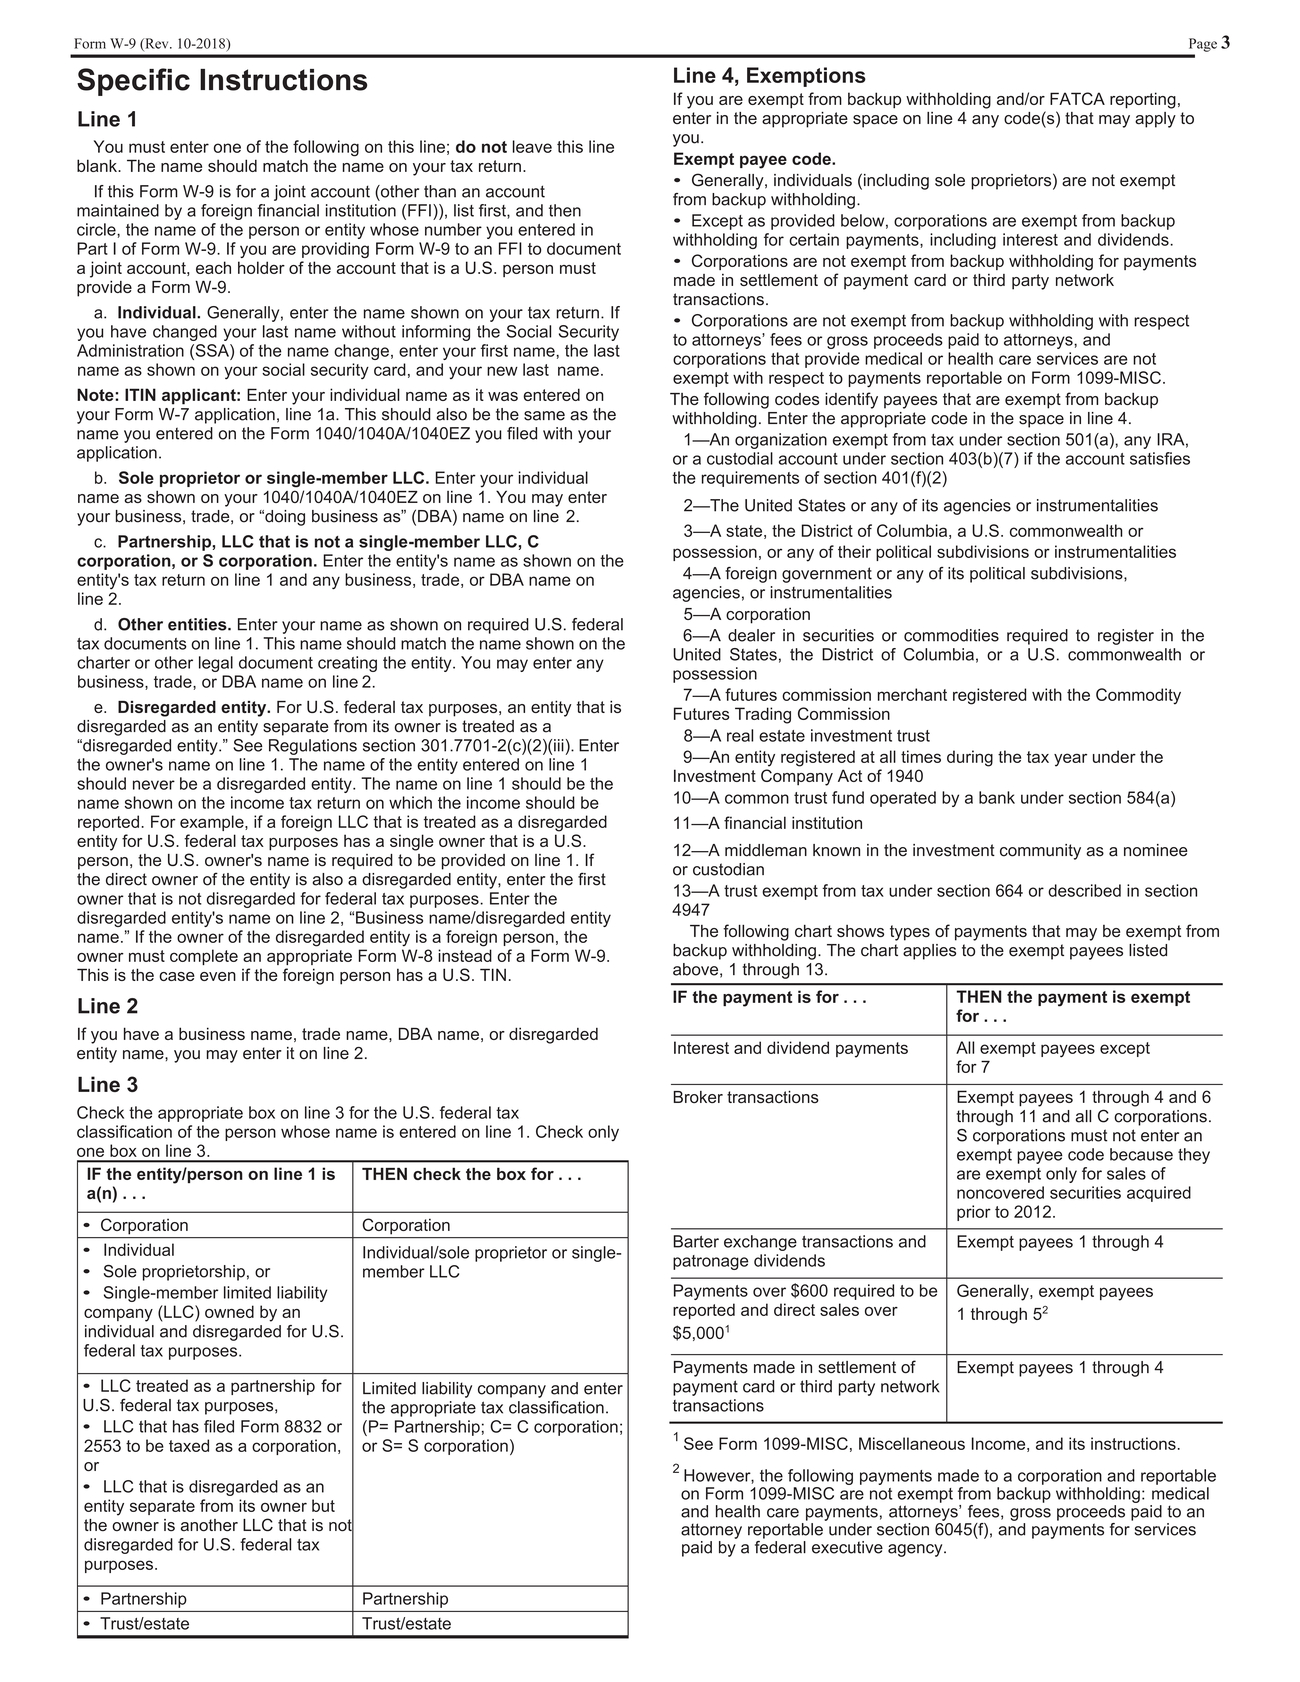 New Microsoft Word Document_exhibitpage099_page003.jpg